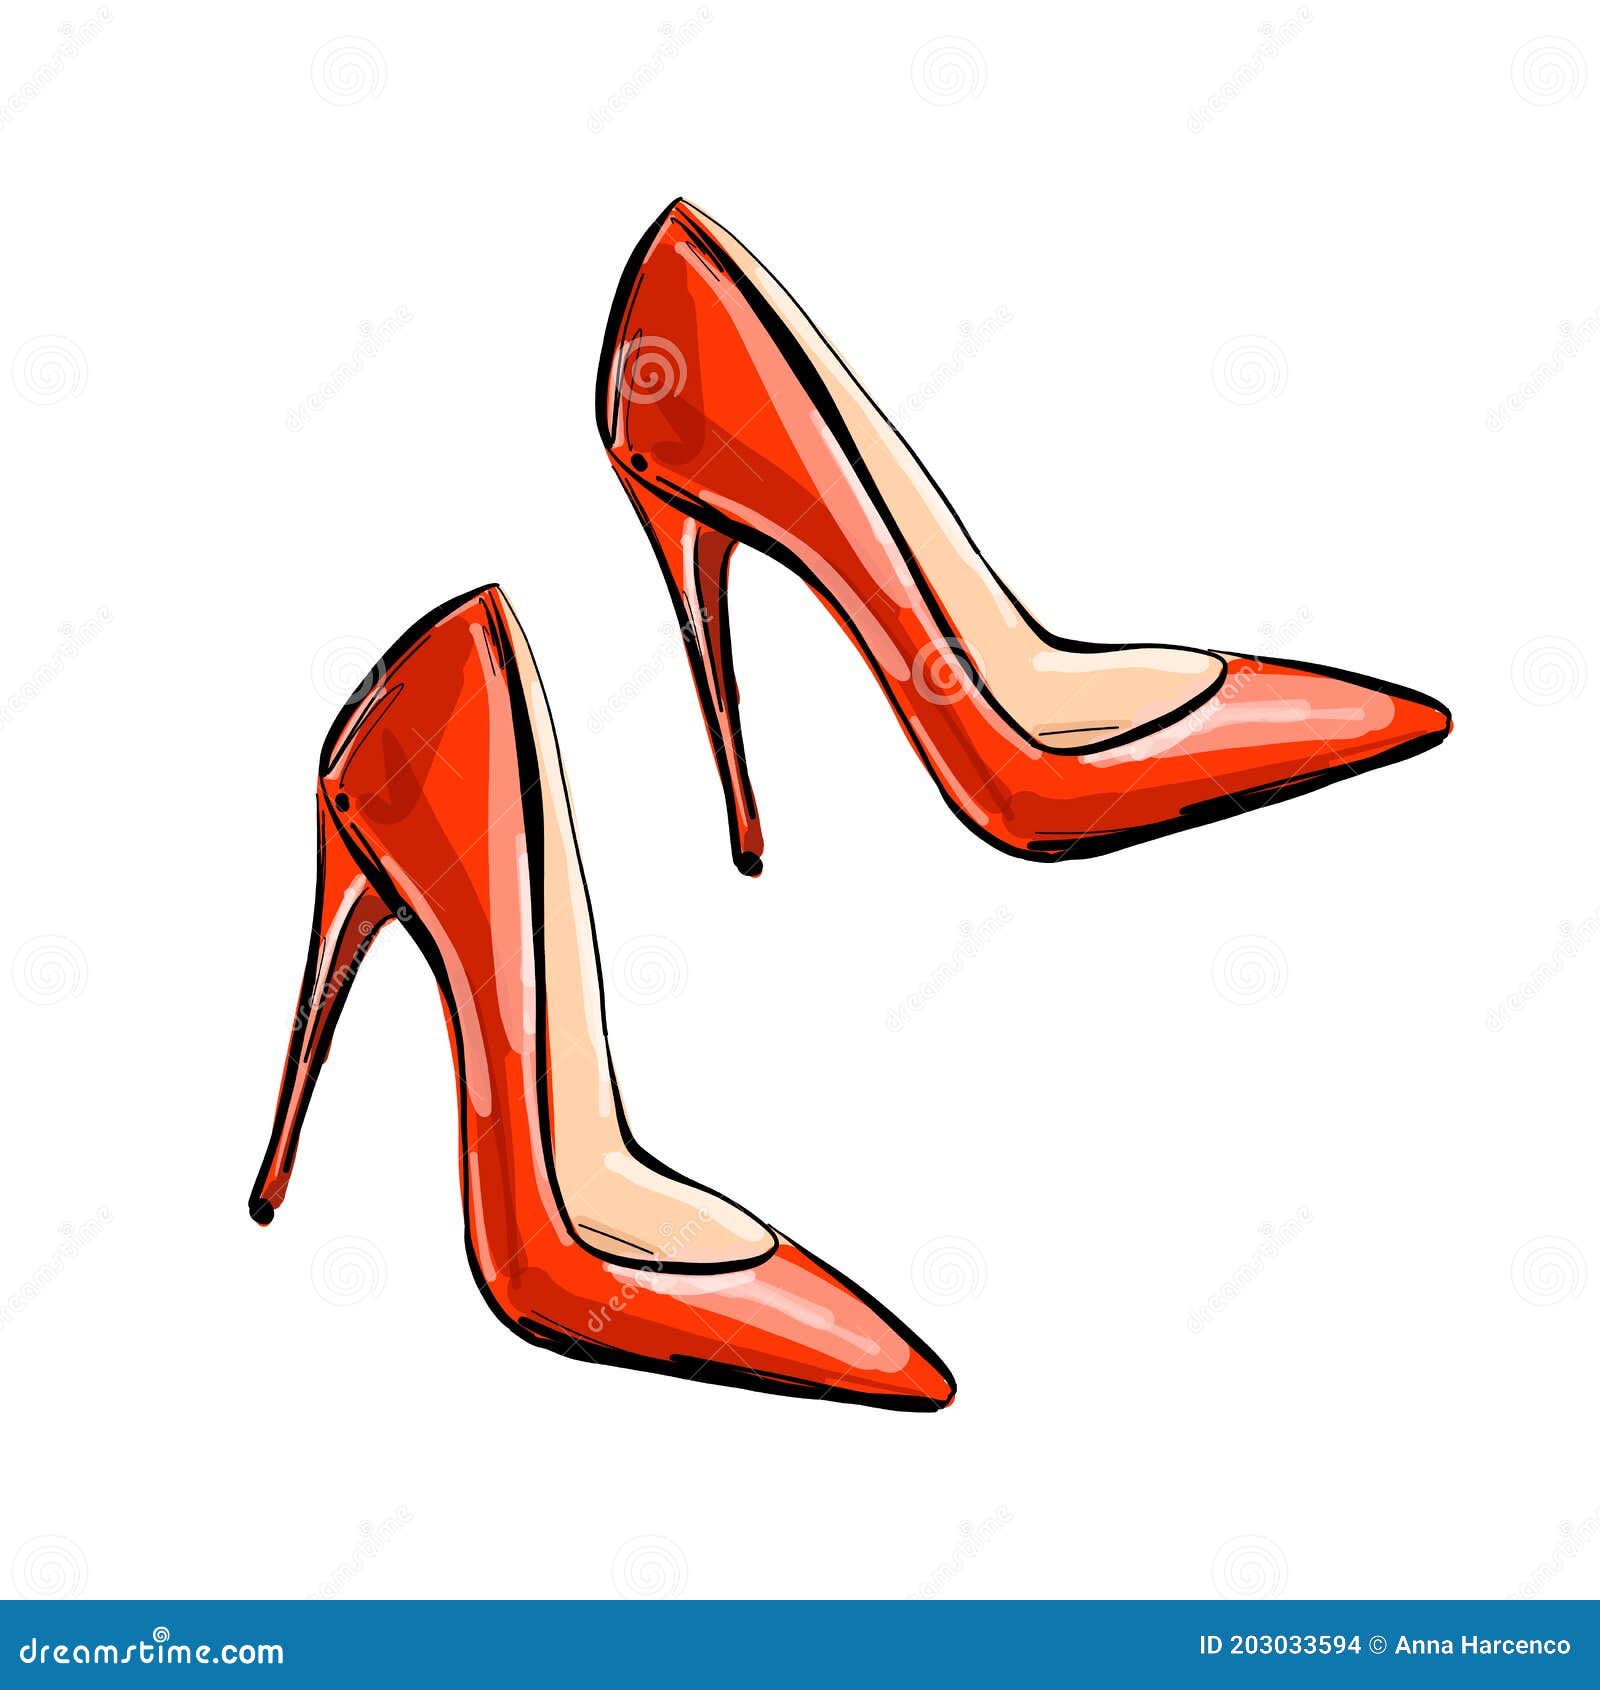 Classic Heels High Shoes Template Stock Illustrations – 24 Inside High Heel Template For Cards